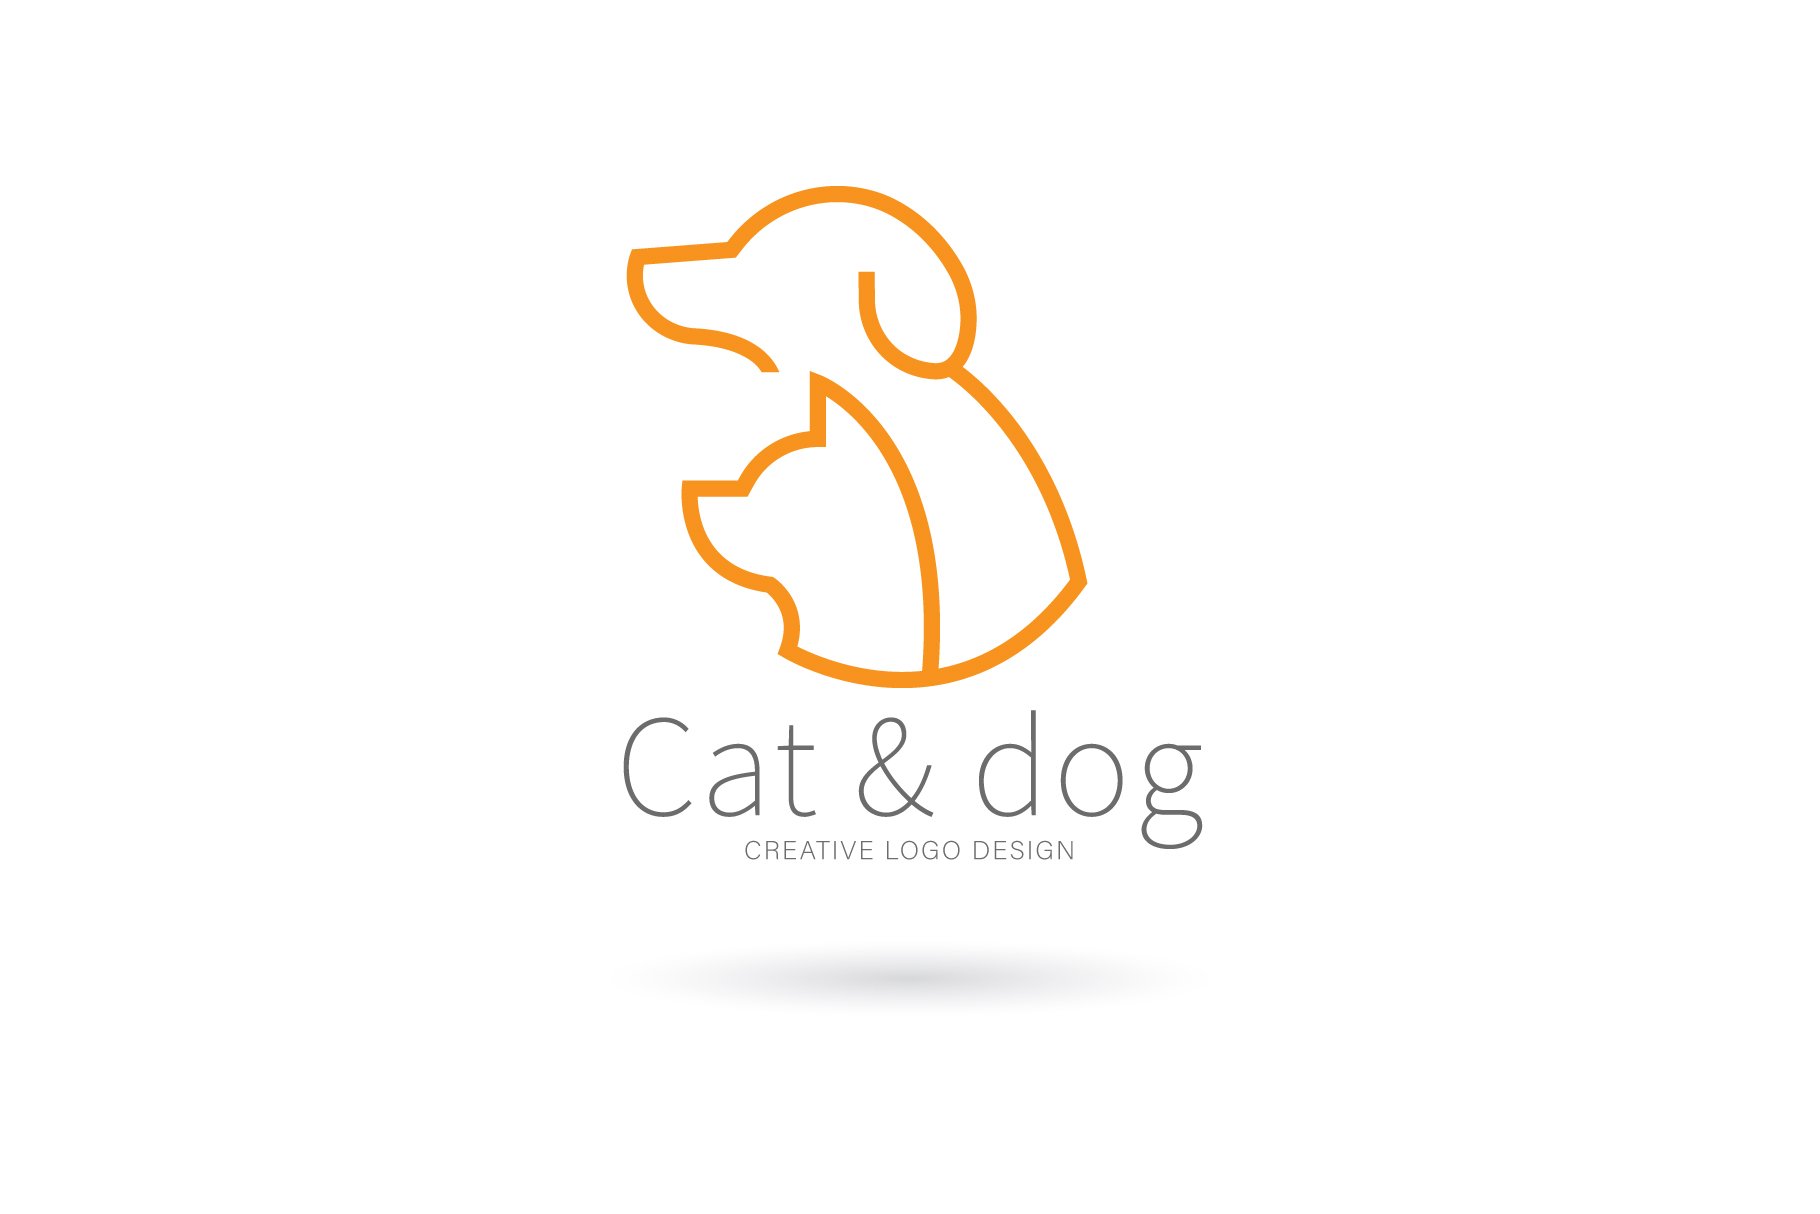 Cat and dog logo cover image.